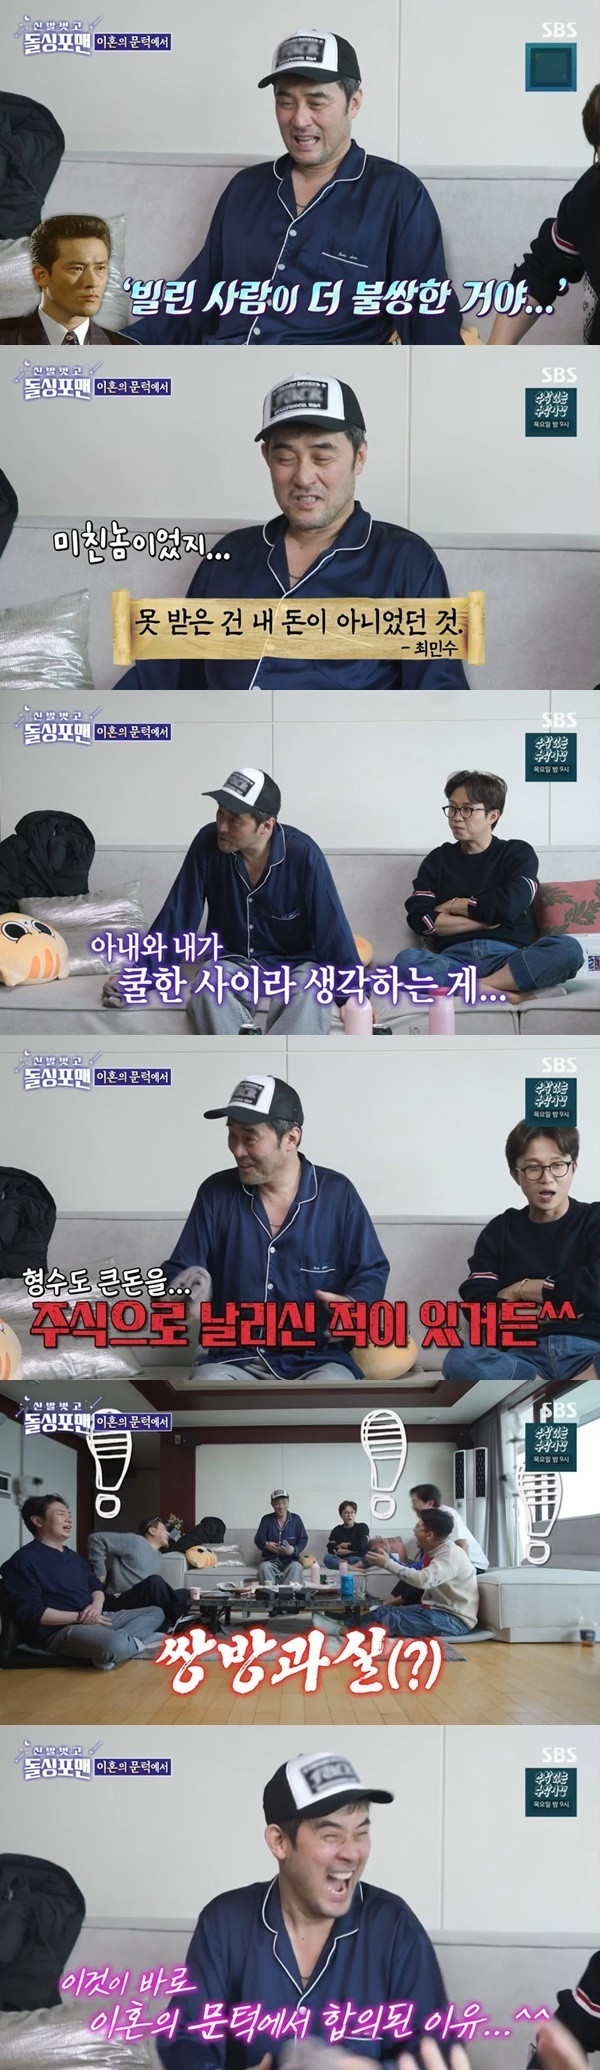 Choi Min-soo Disclosures Wife Kangjus Stock Investment FailureOn March 14, SBS  ⁇ Take off your shoes and dolsing foreman ⁇ , actor Choi Min-soo told the experience of spending big money, and Dollsing4men questioned how to live without divorce.Lee Sang-min said, There were a lot of things that would have been like us. I lent a lot of money to my acquaintances at the beginning of my honeymoon. I did not get a penny.In fact, the Wubi method said, Stop it and you can stamp it.When Tak Jae-hun asked, Do you have any money now? Choi Min-soo said, It was not my money.When Tak Jae-hun asked if it was  ⁇  4 billion, Choi Min-soo replied that he would do more.Tak Jae-hun said, Do you want me to take it? Choi Min-soo thinks that my life will be easier if I receive the money I have not received.What did Lee Sang-min say about the Wubi method?Choi Min-soo said, If you are cool, the Wubi method has also blown a lot of money into stocks at once, said Kangjus failure to invest in stocks.When Tak Jae-hun asked me if I had done it once, Choi Min-soo said, I do not talk about Wubi method and what I am cool about.I said, Ill talk to you from behind, and laughed.Lee Sang-min said, This is not easy either. My acquaintance was having a hard time, so I lived in my honeymoon home. The acquaintance went out to my bankbook and told me the second incident, and Choi Min-soo said, Now I think its crazy.I lived with Kangju while I was living with her. She had everything I had. I left her with her like a wife, she explained.When Lee Sang-min asked if he did not report it because it was a felony crime, Choi Min-soo said, Its Friend. When did you get a call? Intuitively, the friend answered.Yes, I called you well and I hope it will be the last time. I would have called you because I regretted it. I told you so instead. Im sorry. I would have had more to take in my life.Tak Jae-hun is cool, but you know its a divorce.In the third case, the advertisement came in, but the sweets were rejected. Lee Sang-min lamented that it would be frustrating for the Wubi method, and Choi Min-soo said, My sister does not express anything.Tak Jae-hun said, There was a chance that we would be divorced more than us.